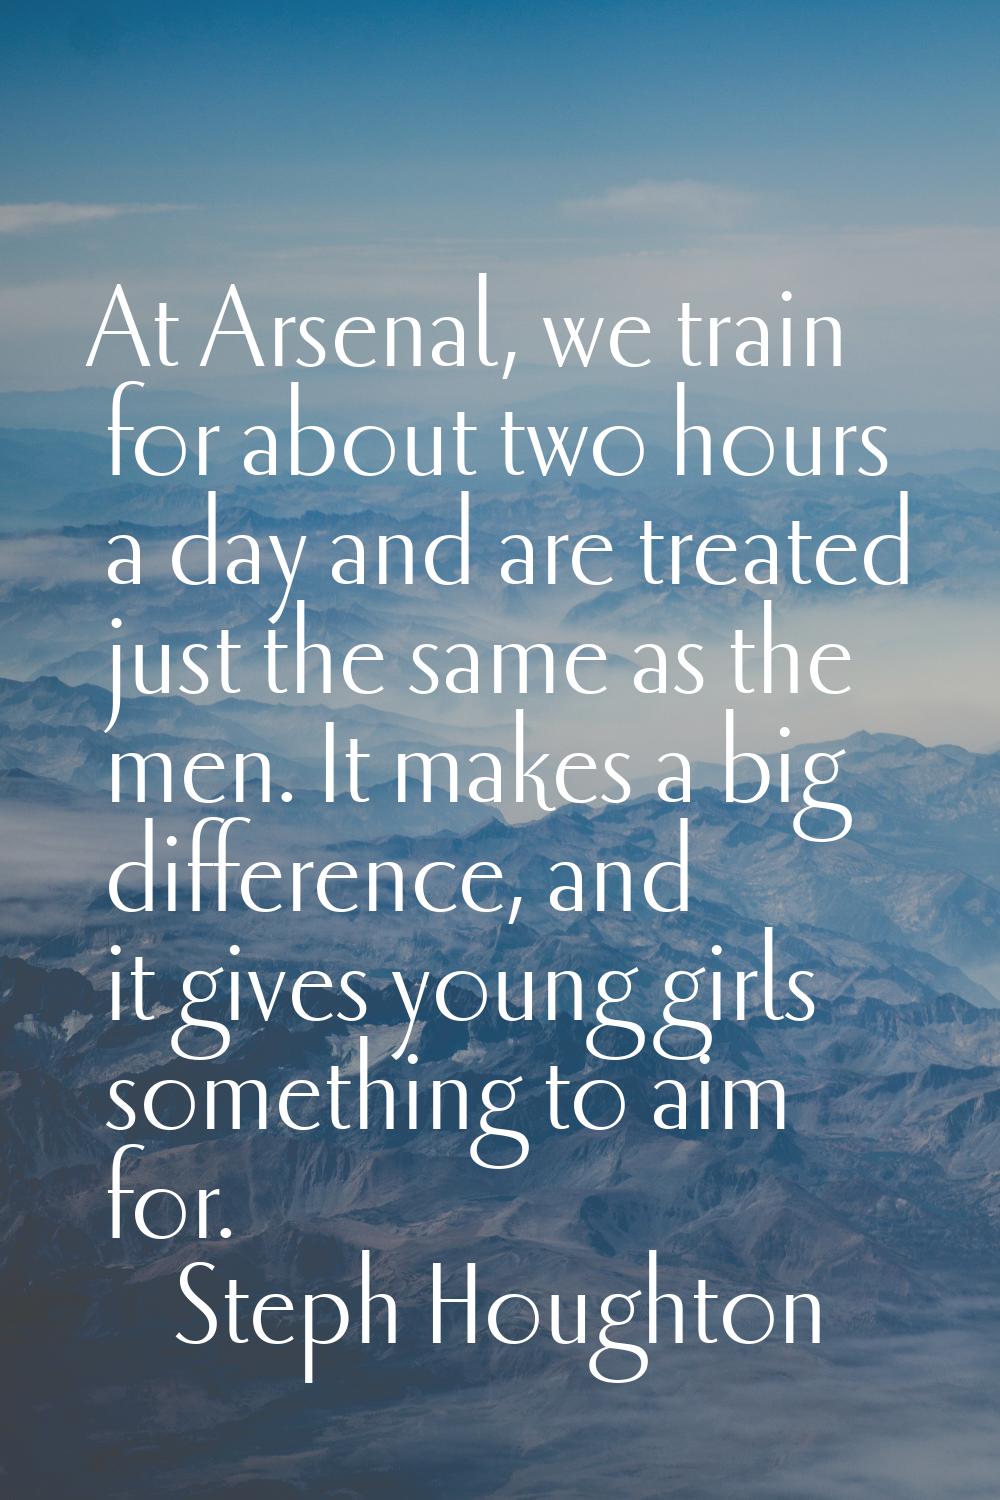 At Arsenal, we train for about two hours a day and are treated just the same as the men. It makes a